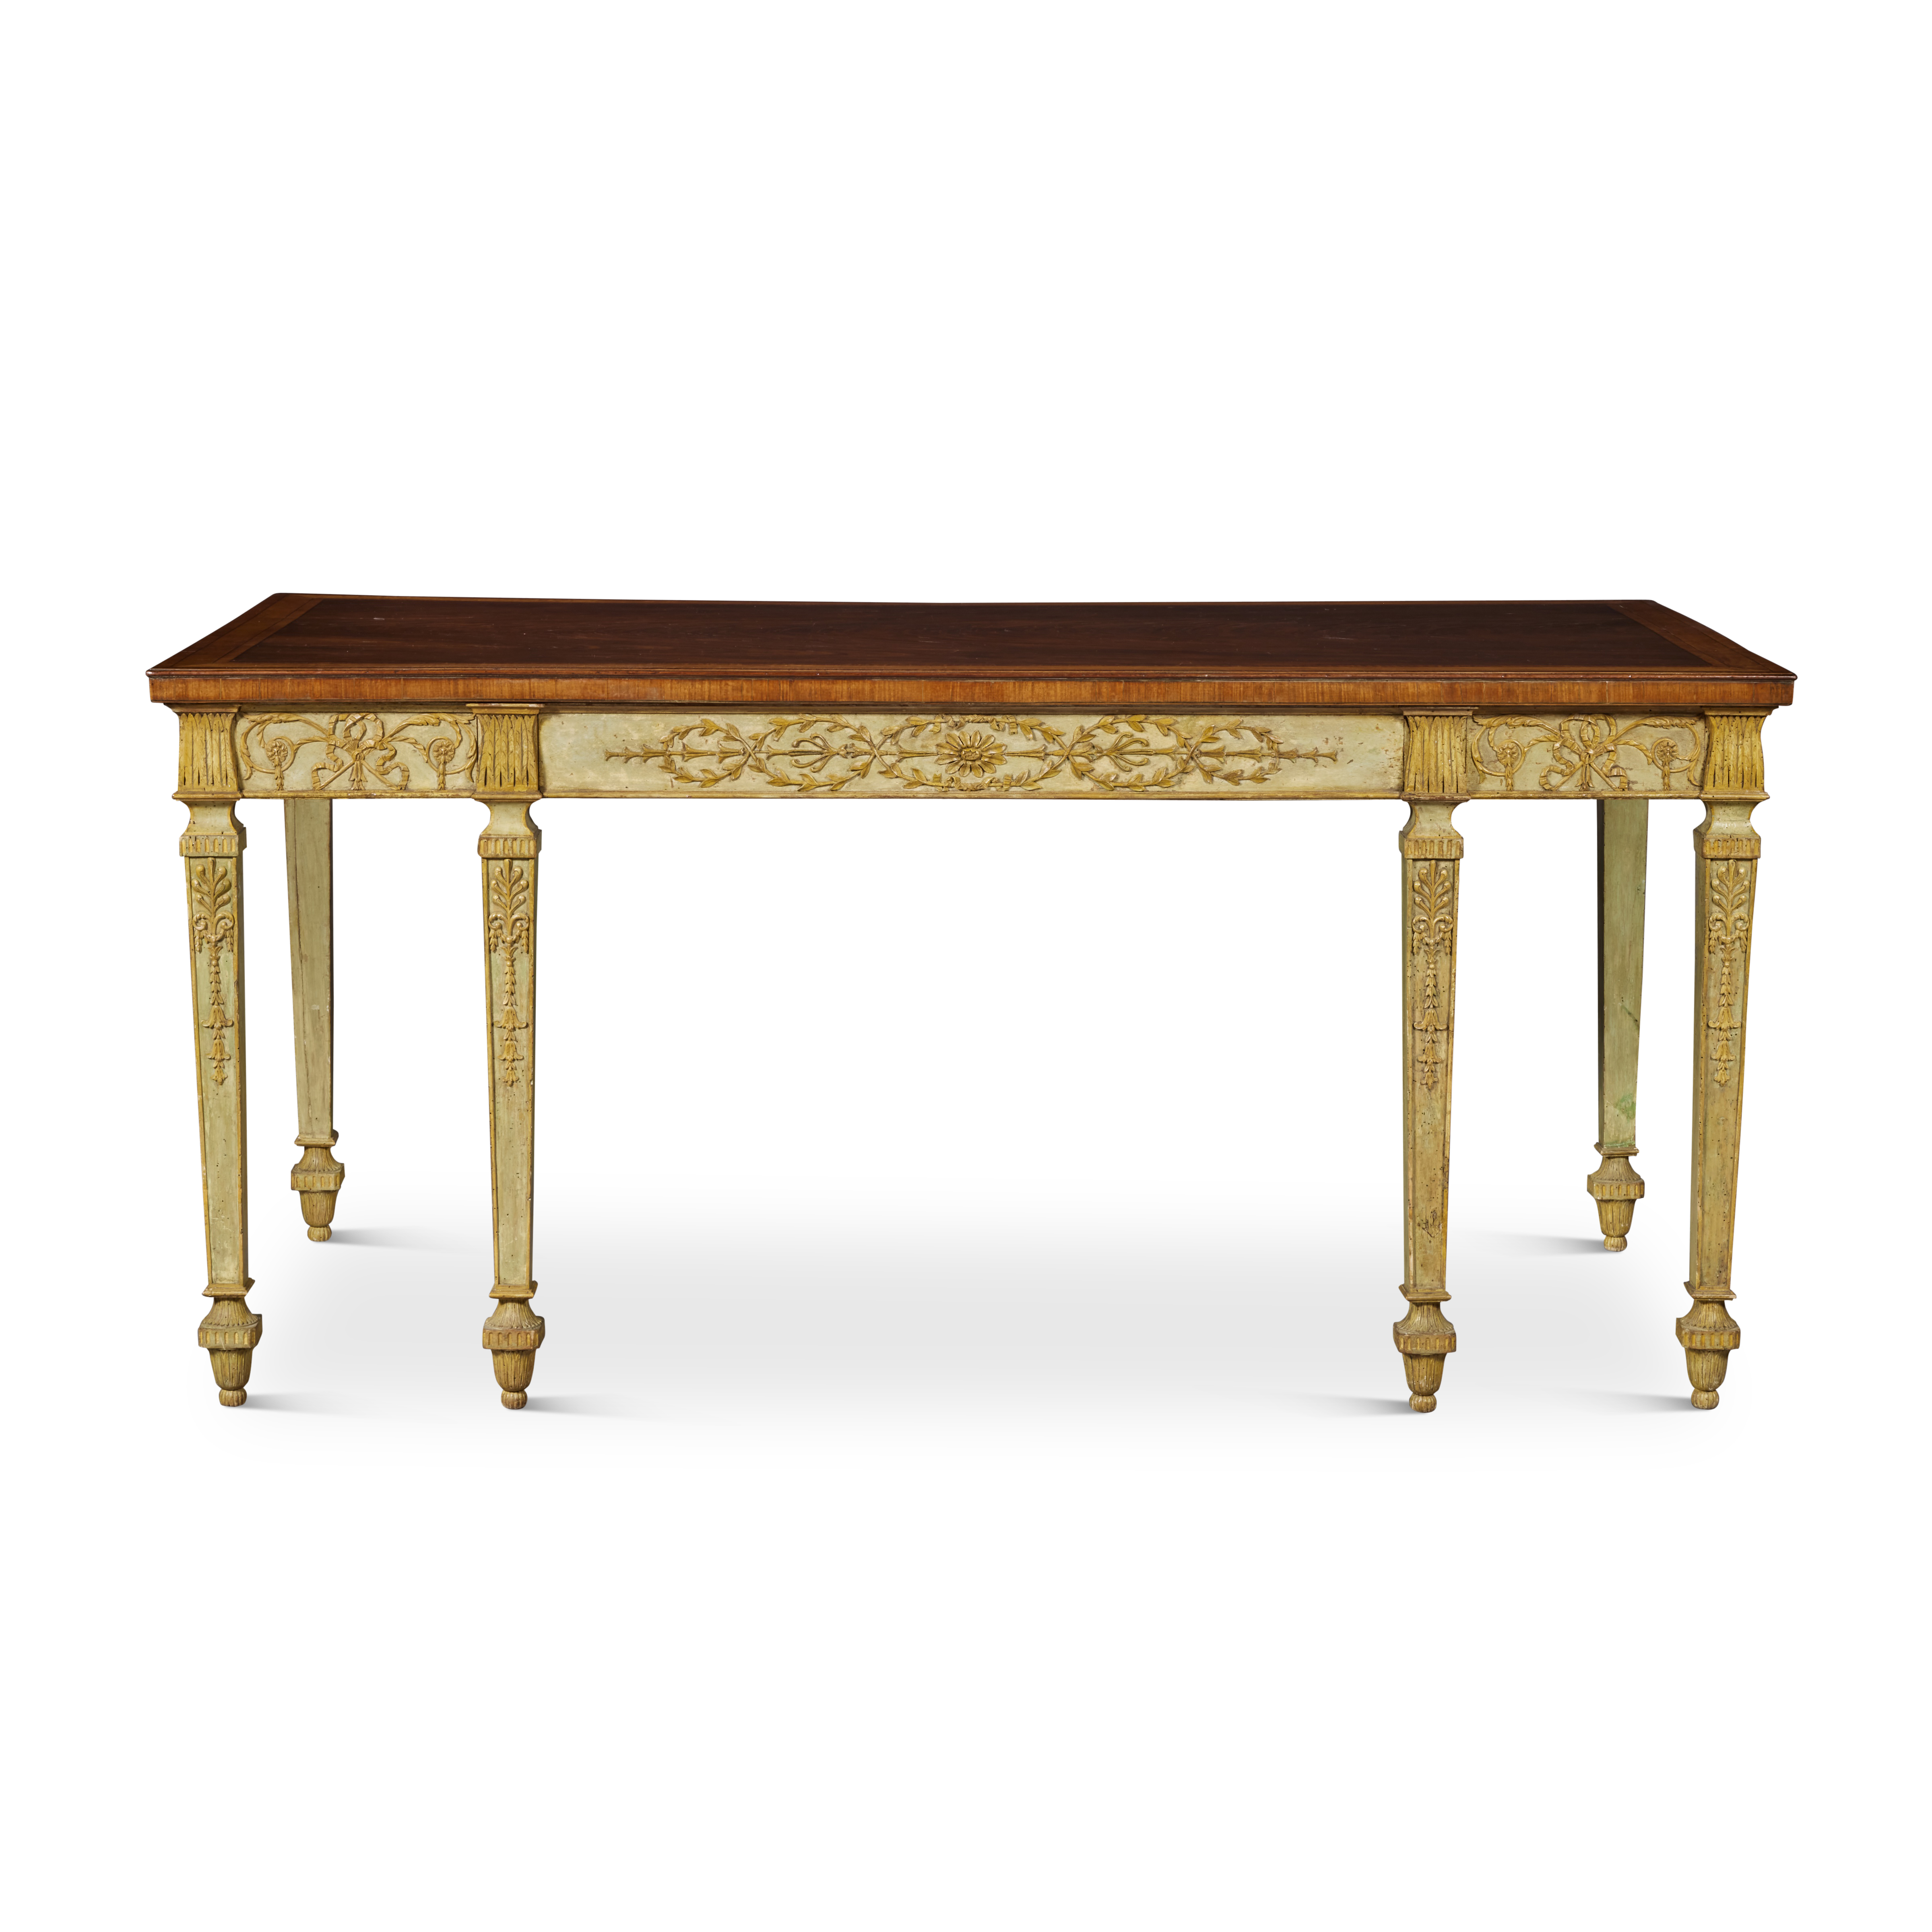 A George III Green Painted and Parcel-Gilt Side Table with a Satinwood and Tulipwood-Banded Sabicu T